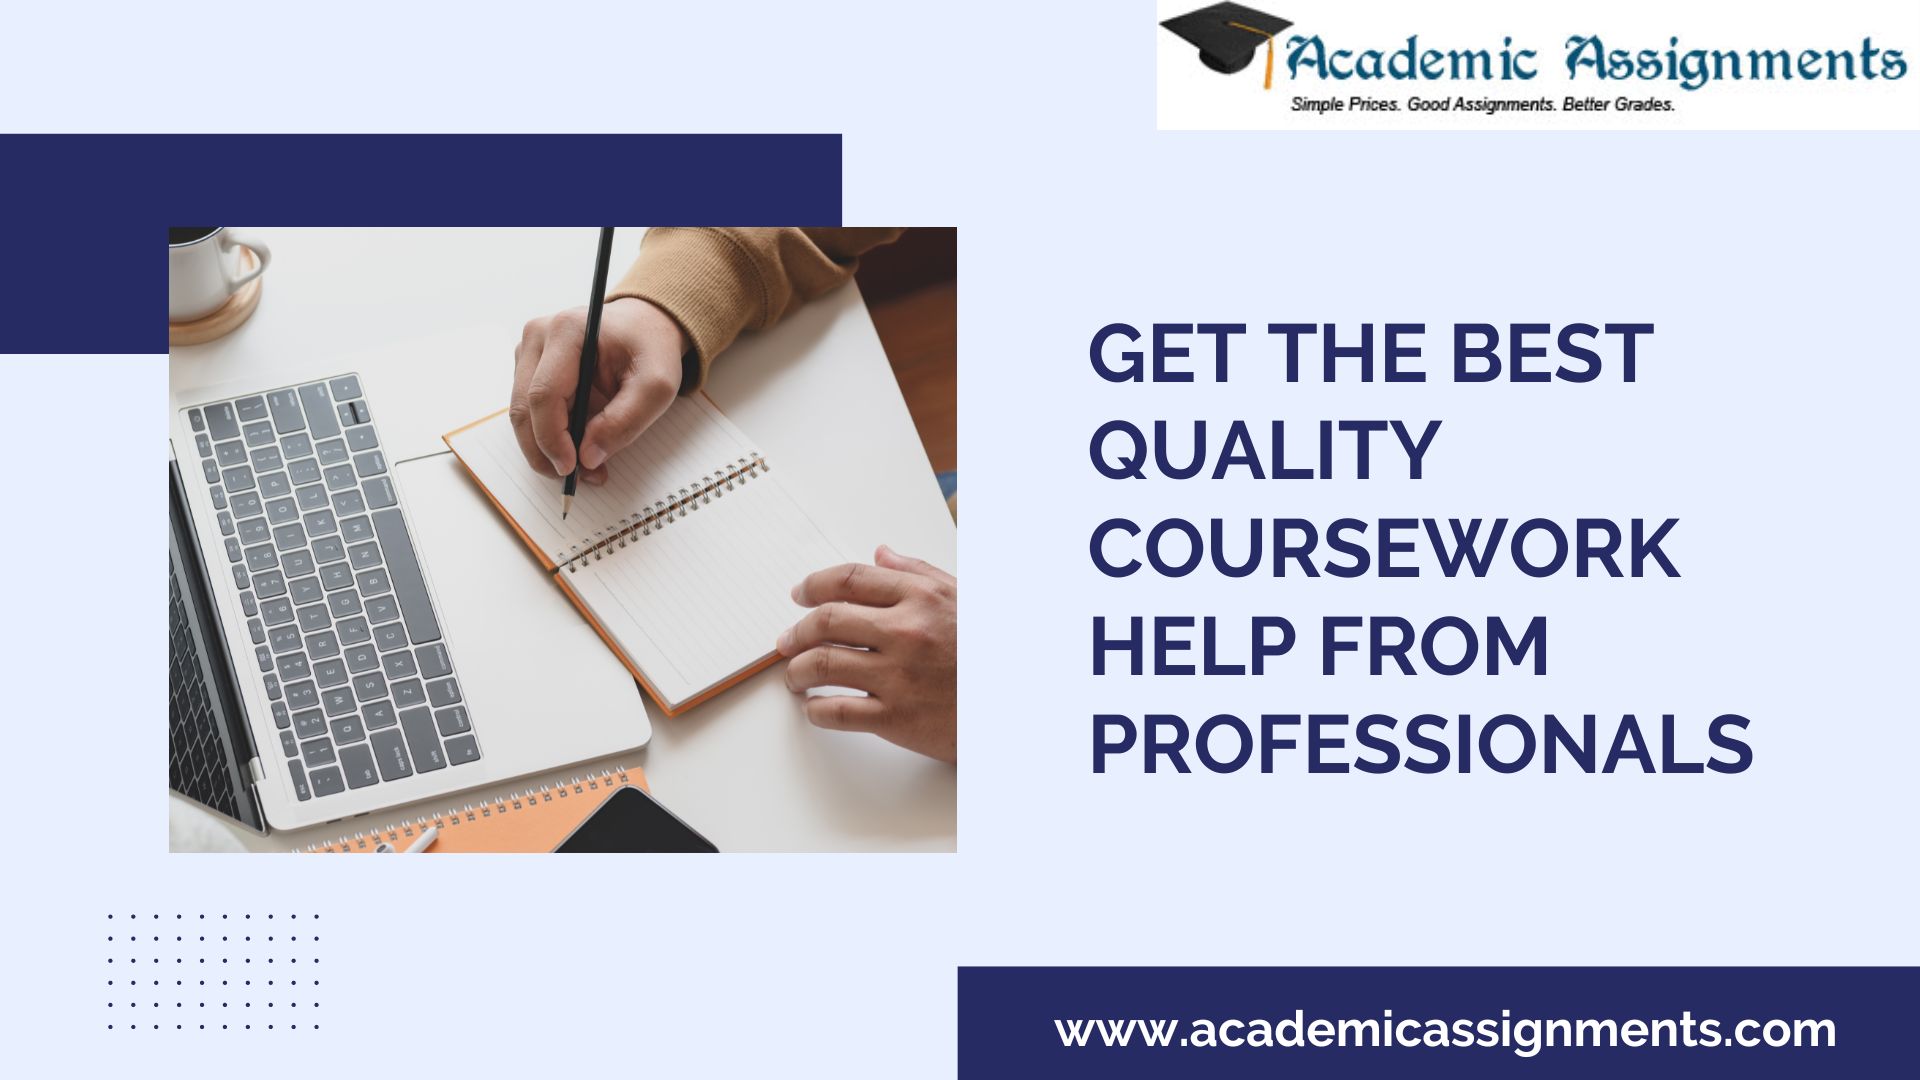 Get the best quality coursework help from professionals